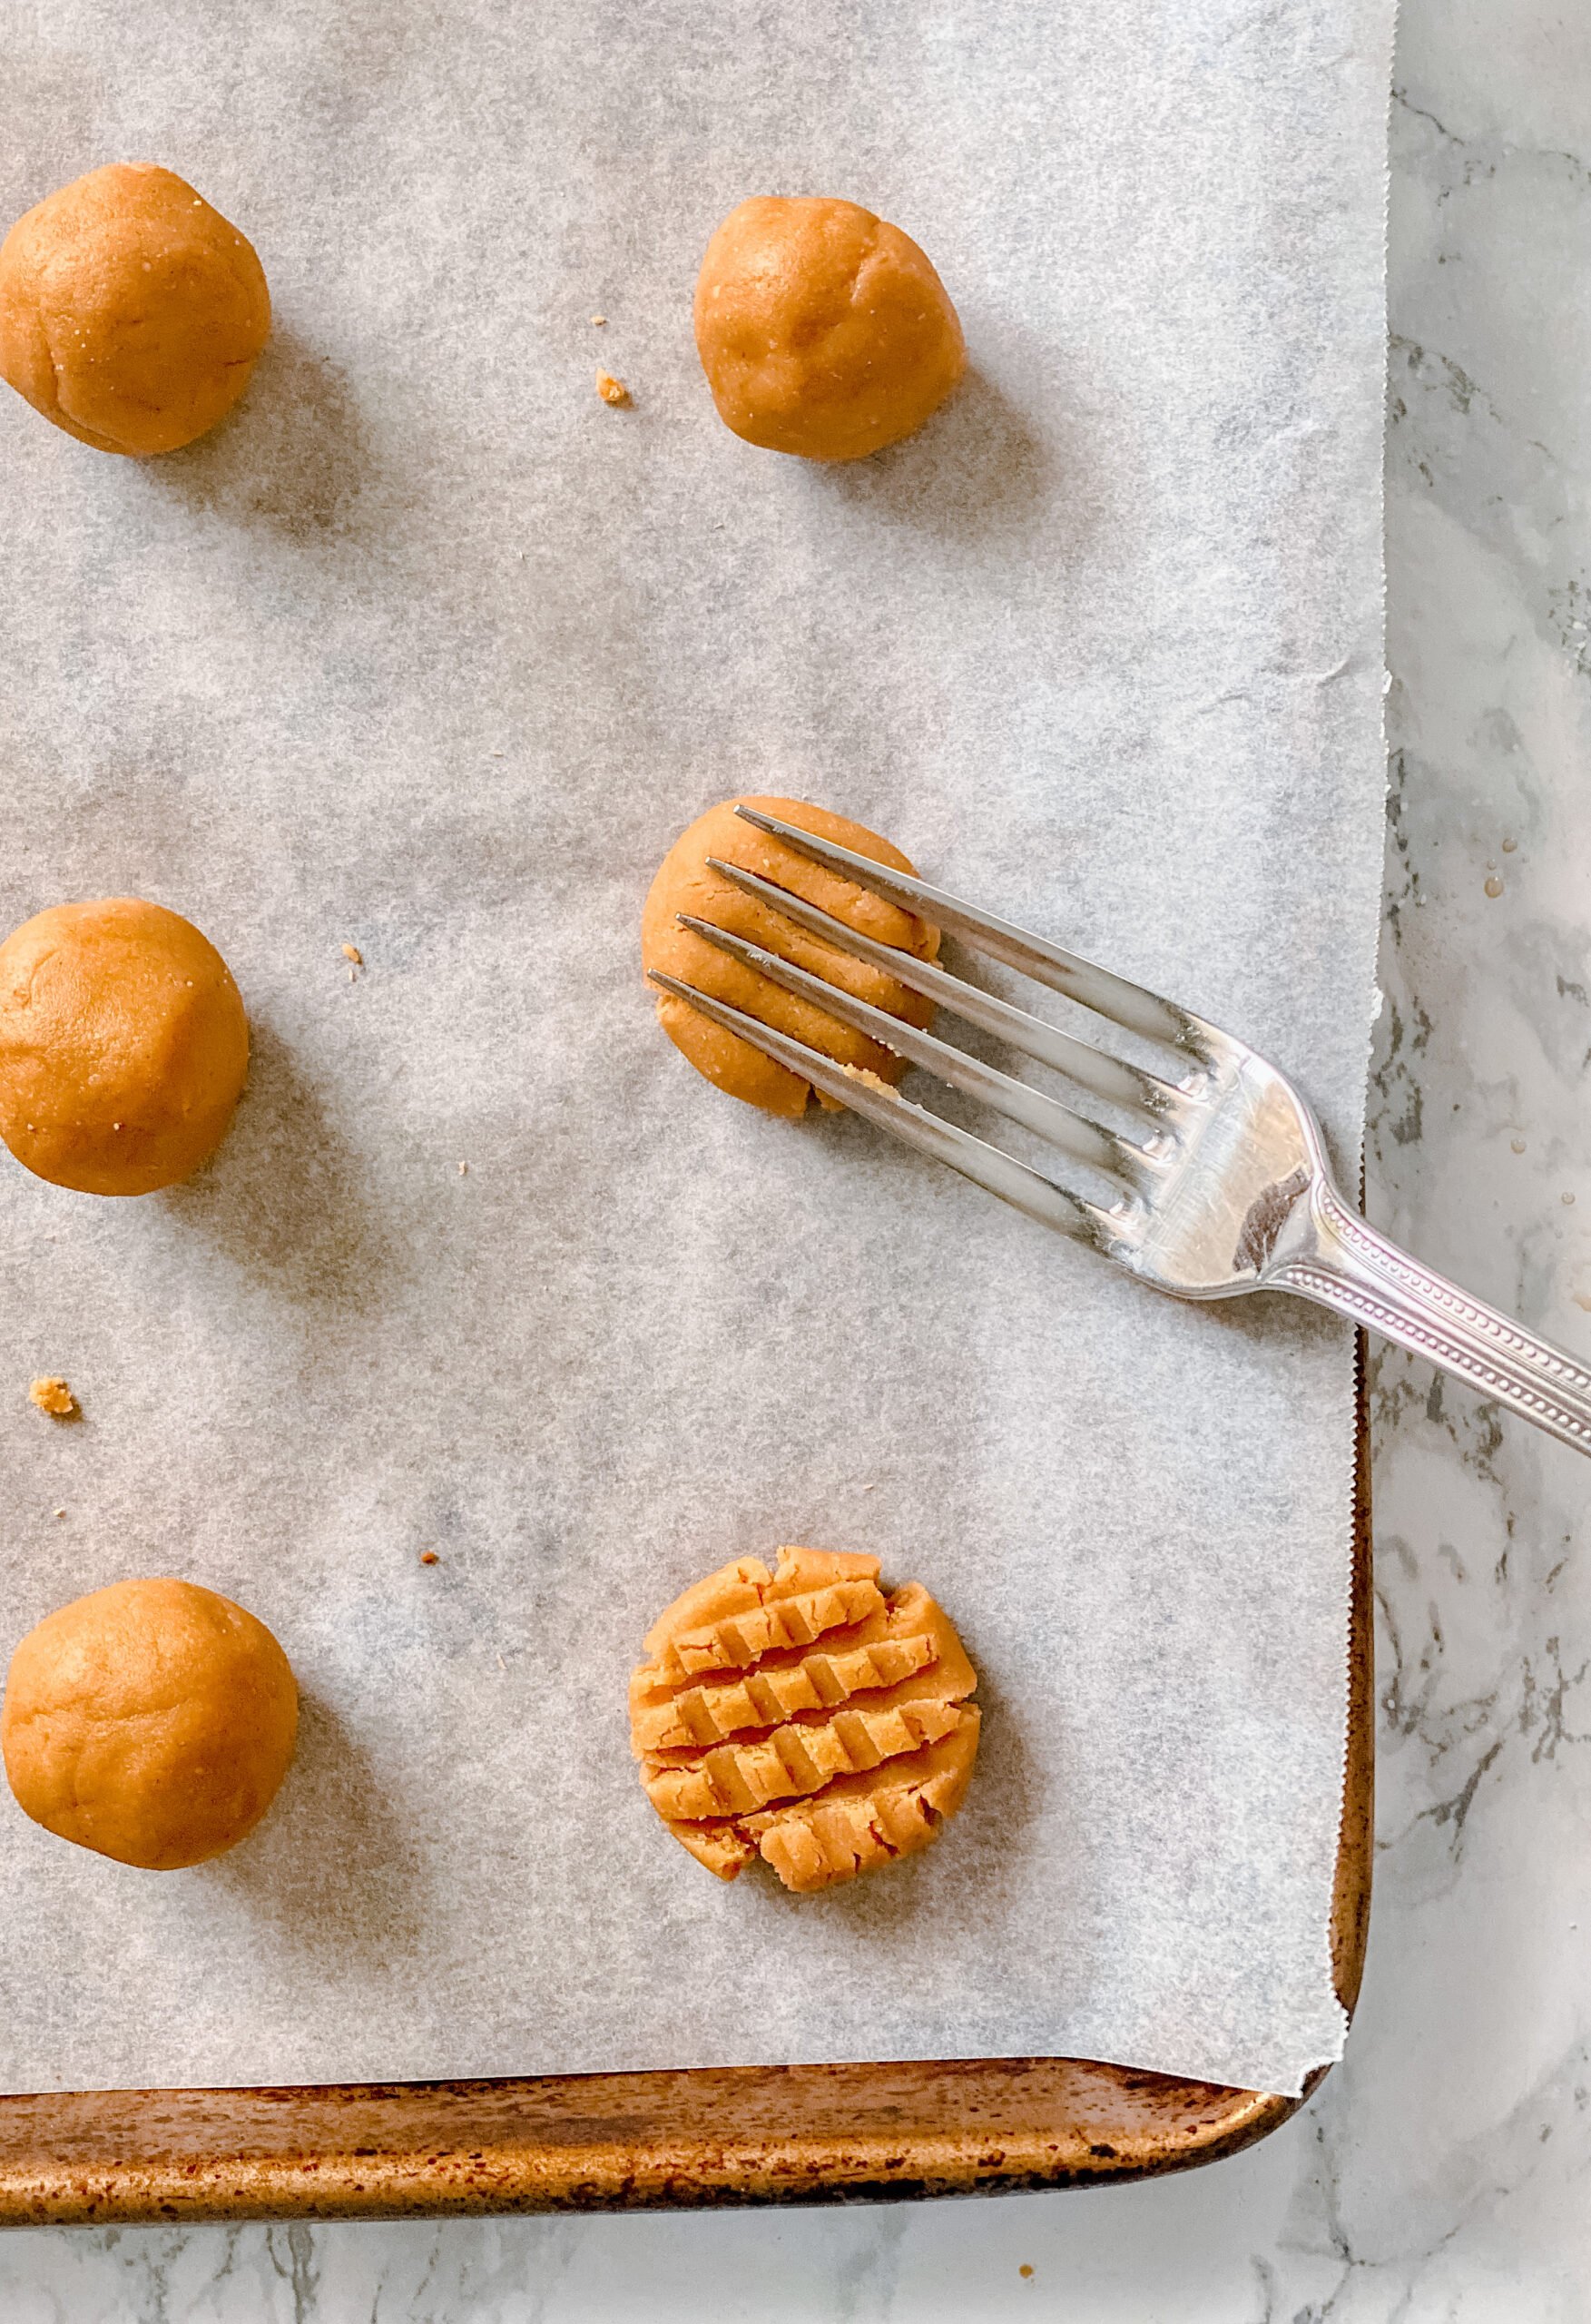 Parchment lined baking sheet with balls of no bake peanut butter cookie dough. One has been flattened with a fork to make a criss cross pattern, one has a fork in it, creating the texture.